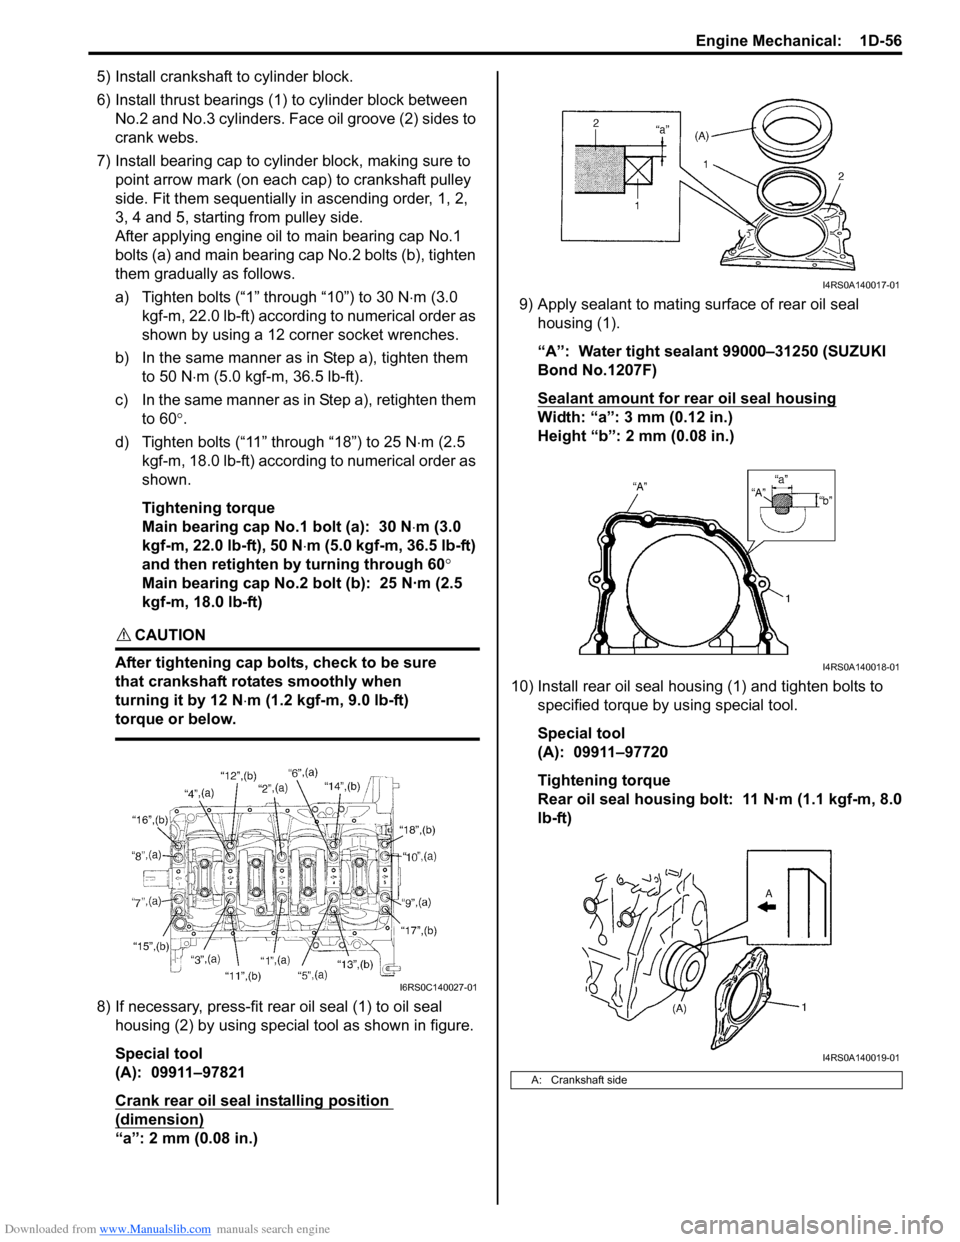 SUZUKI SWIFT 2006 2.G Service Workshop Manual Downloaded from www.Manualslib.com manuals search engine Engine Mechanical:  1D-56
5) Install crankshaft to cylinder block.
6) Install thrust bearings (1) to cylinder block between No.2 and No.3 cylin